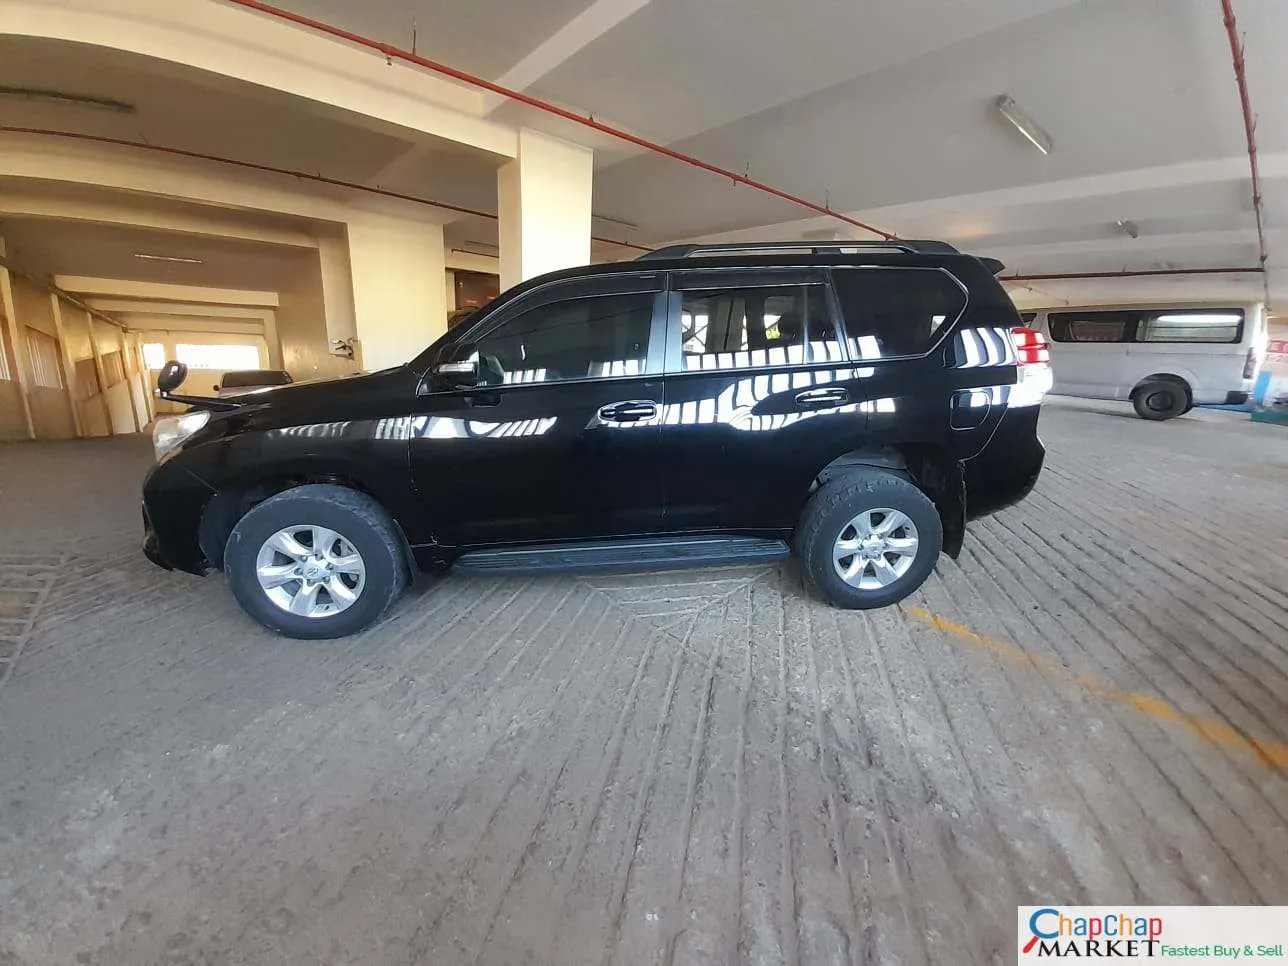 Cars Cars For Sale/Vehicles-Toyota Prado j150 with SUNROOF You Pay 40% Deposit 70% installments Trade in OK 7